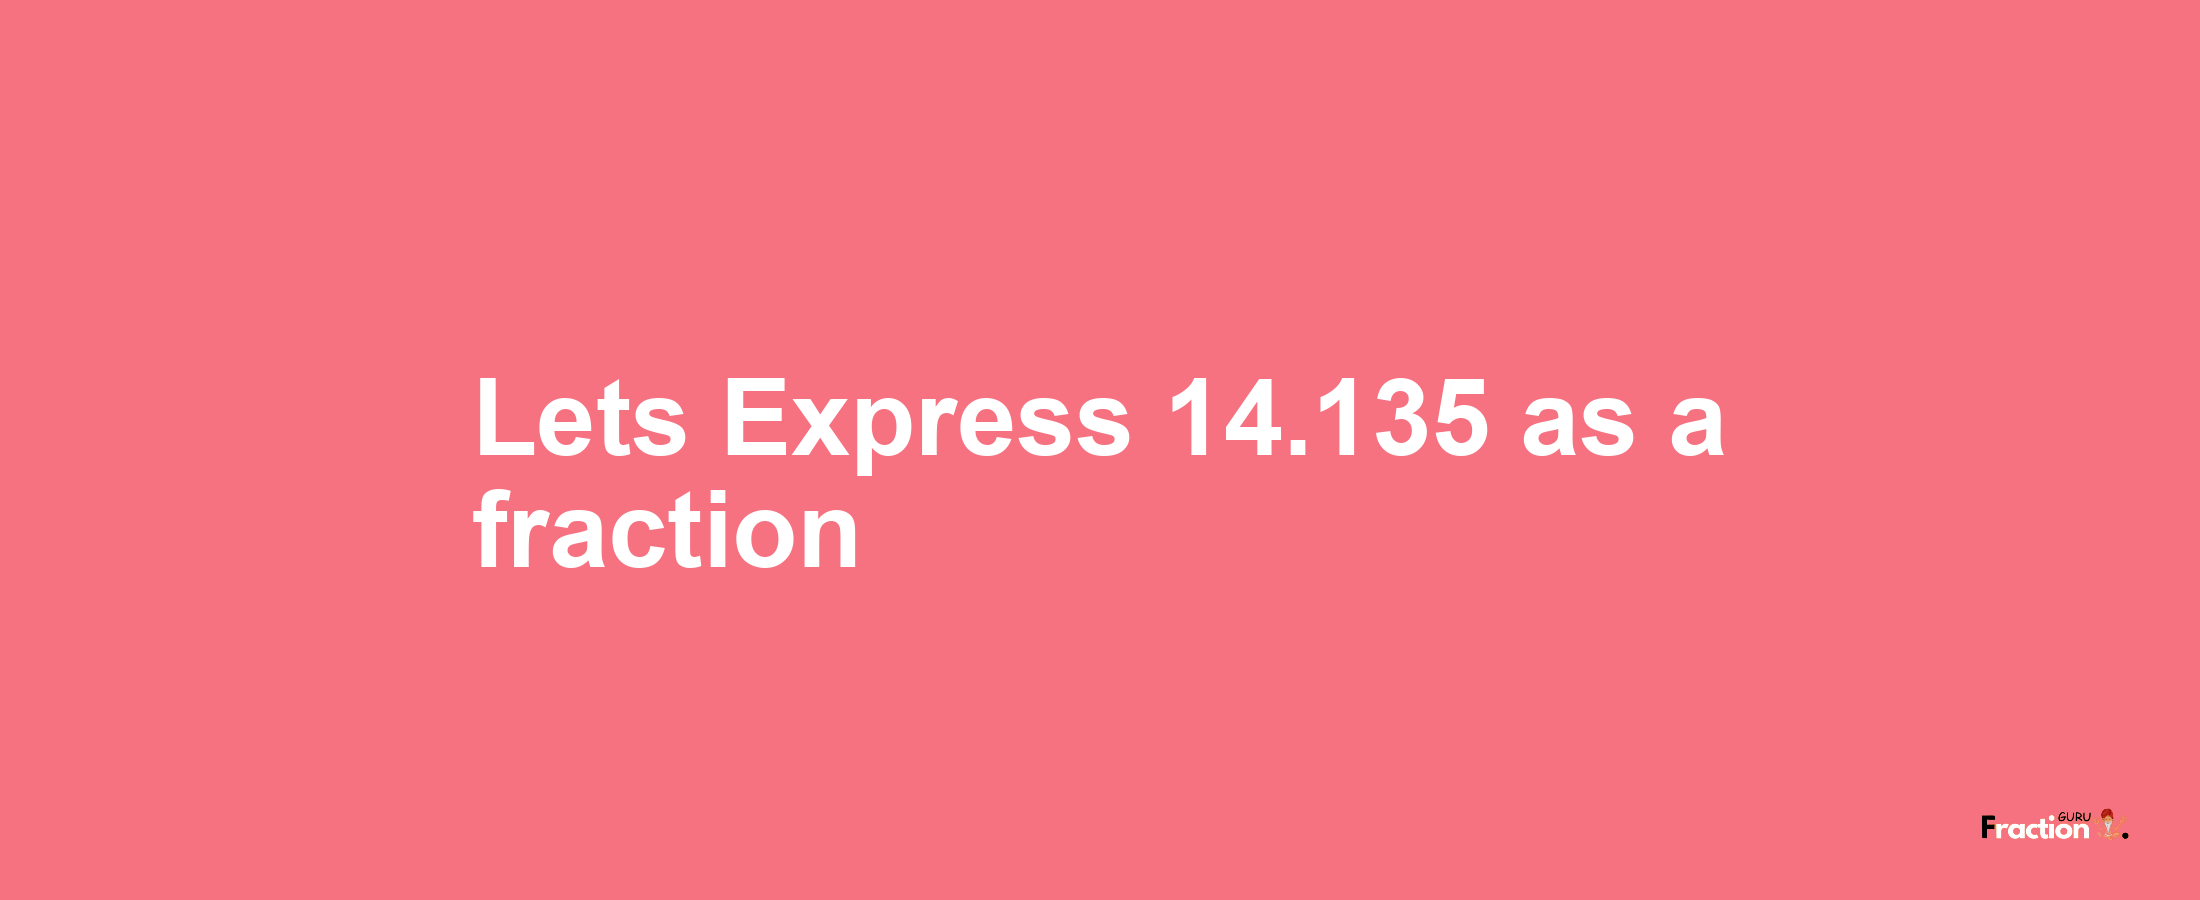 Lets Express 14.135 as afraction